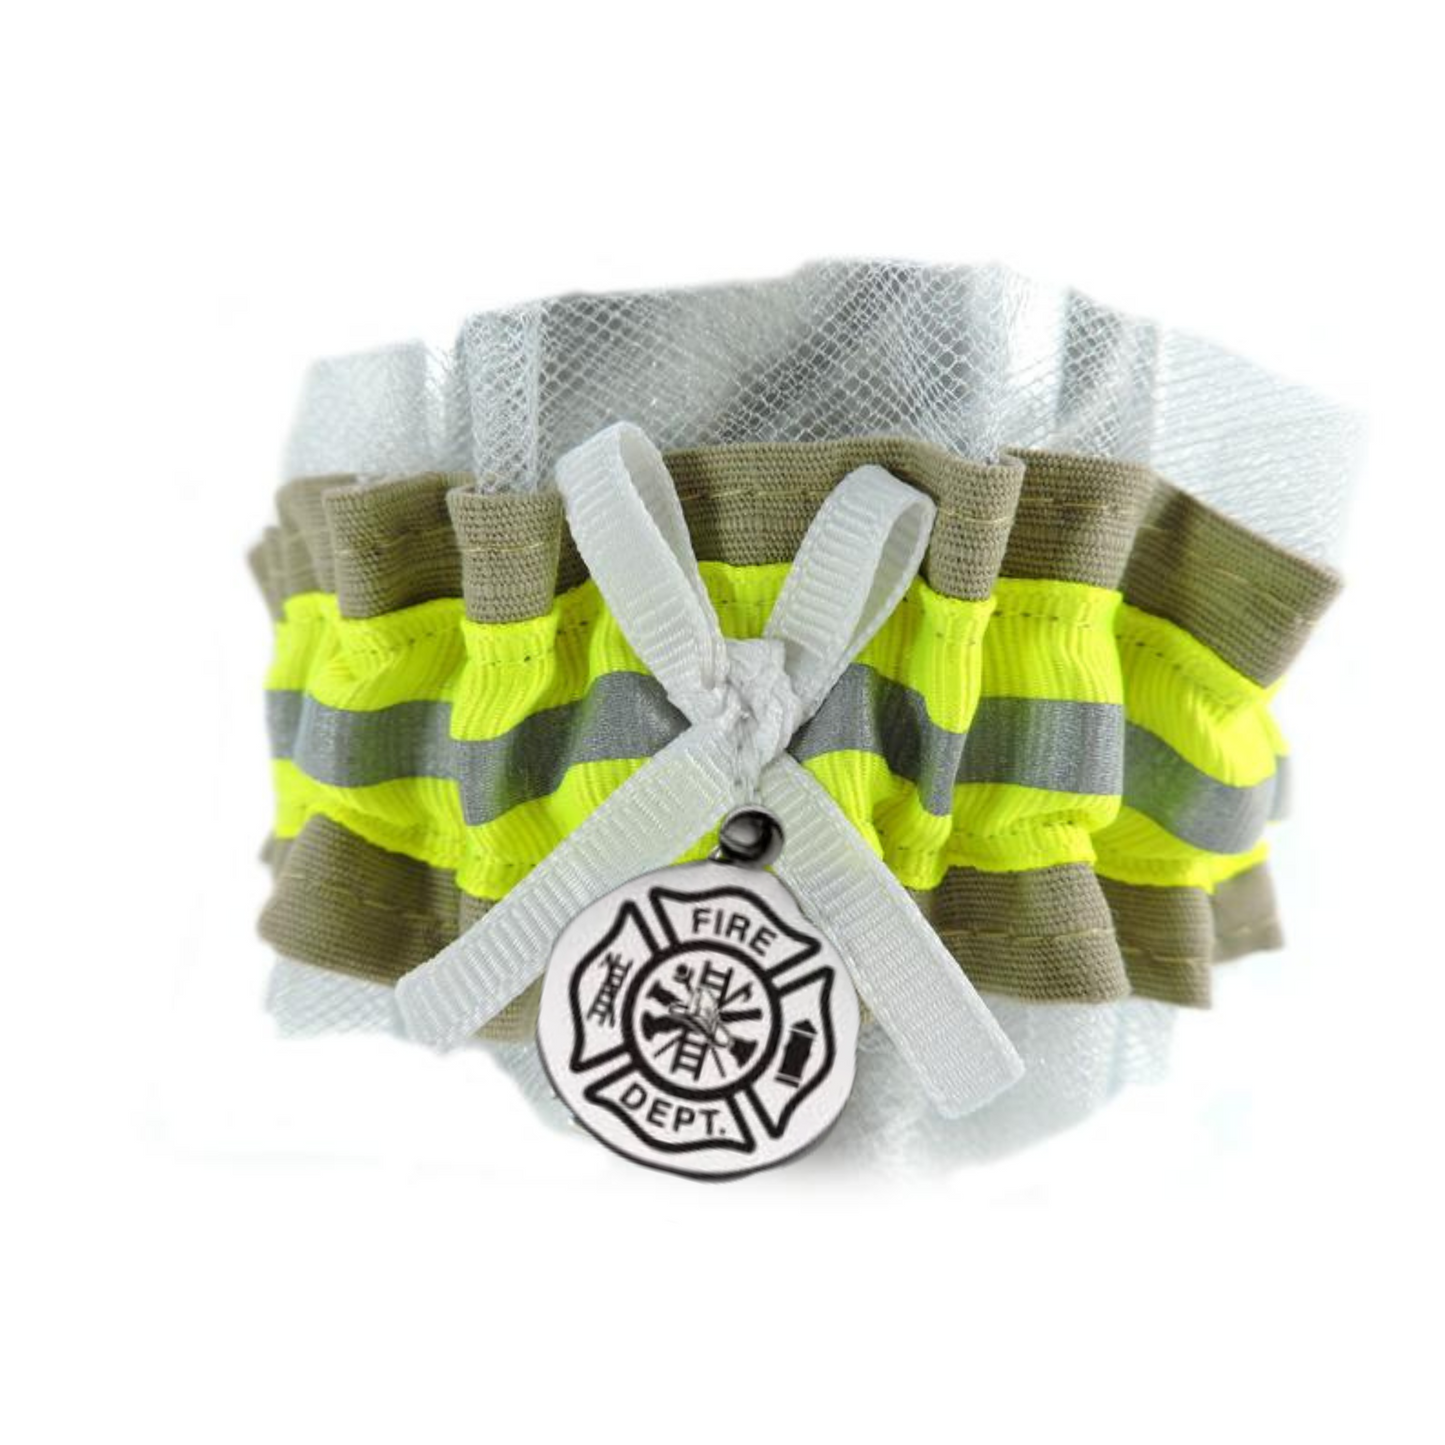 Firefighter wedding garter WHITE tulle with tan fabric and neon yellow reflective tape